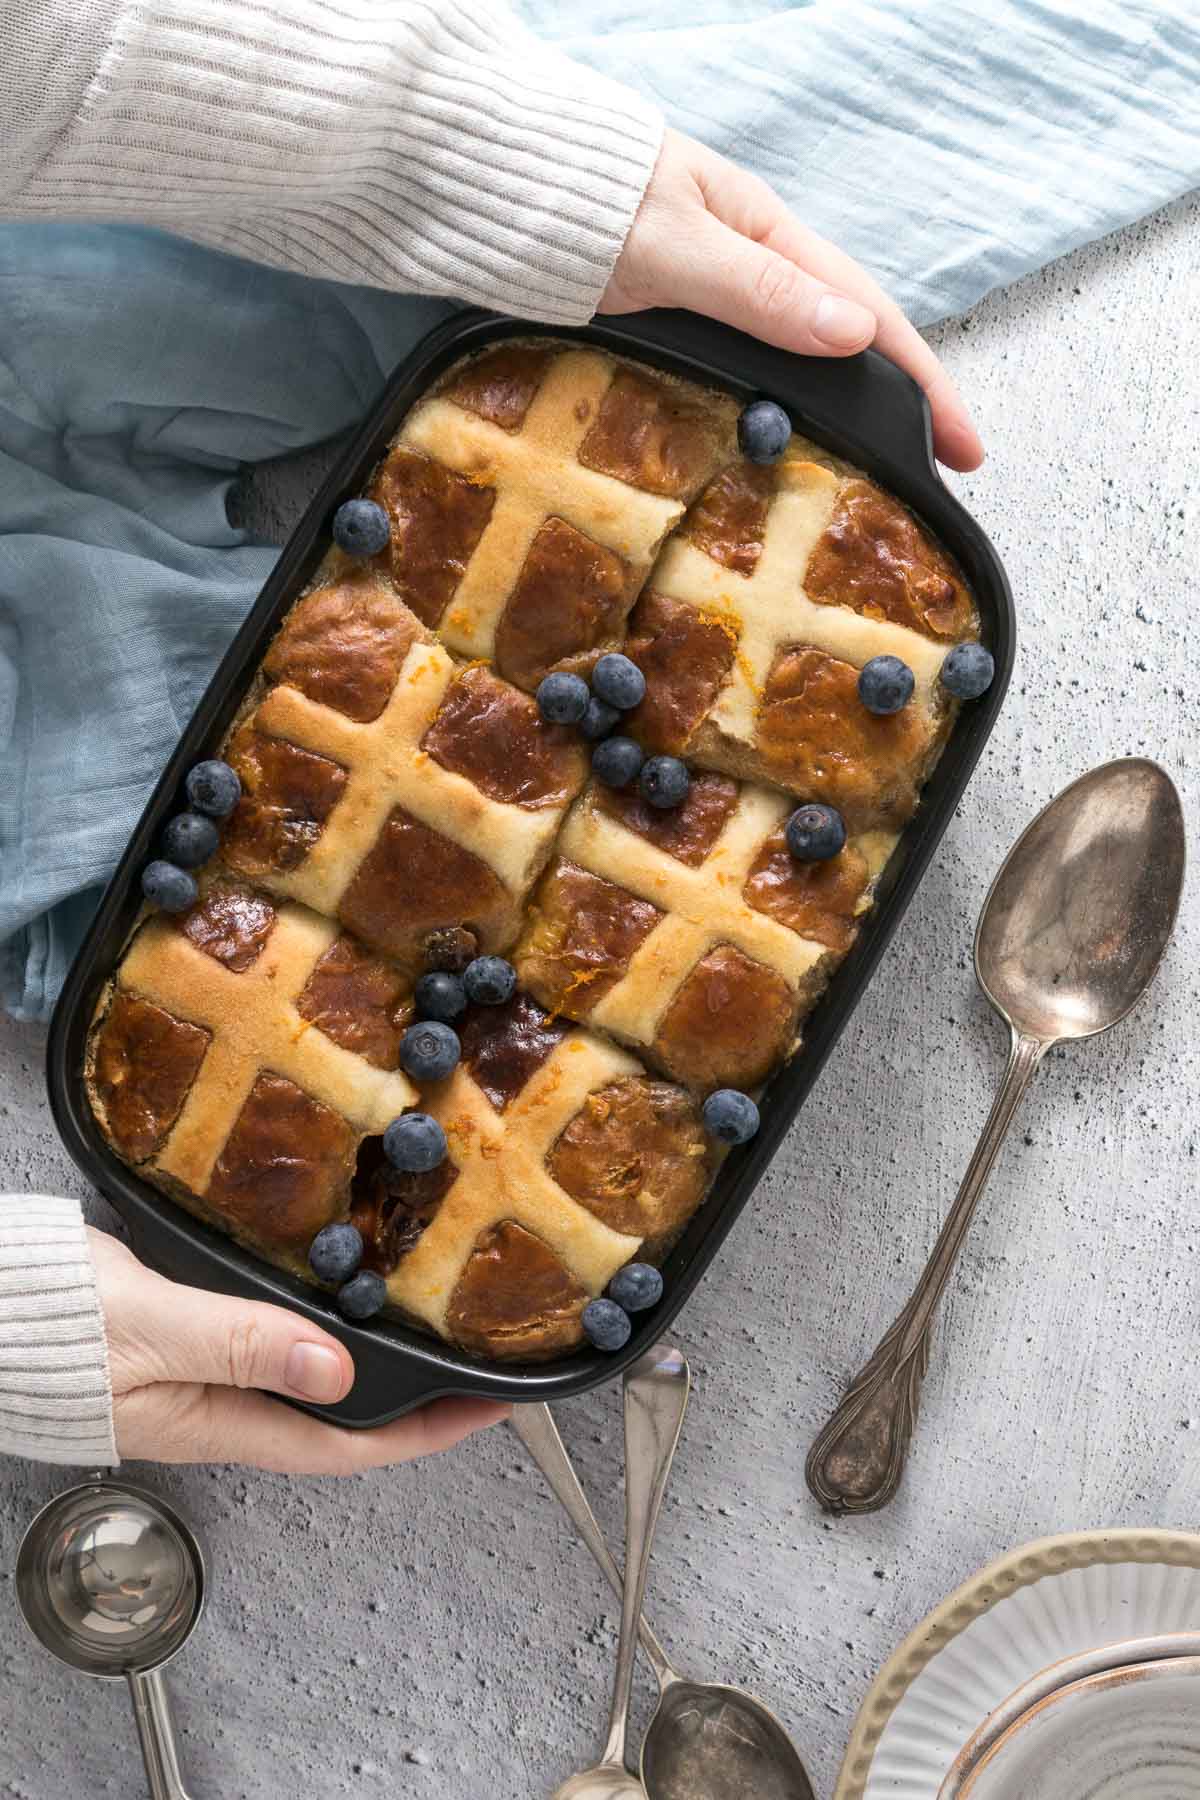 Baked hot cross bun pudding with fresh blueberries being placed on a table.